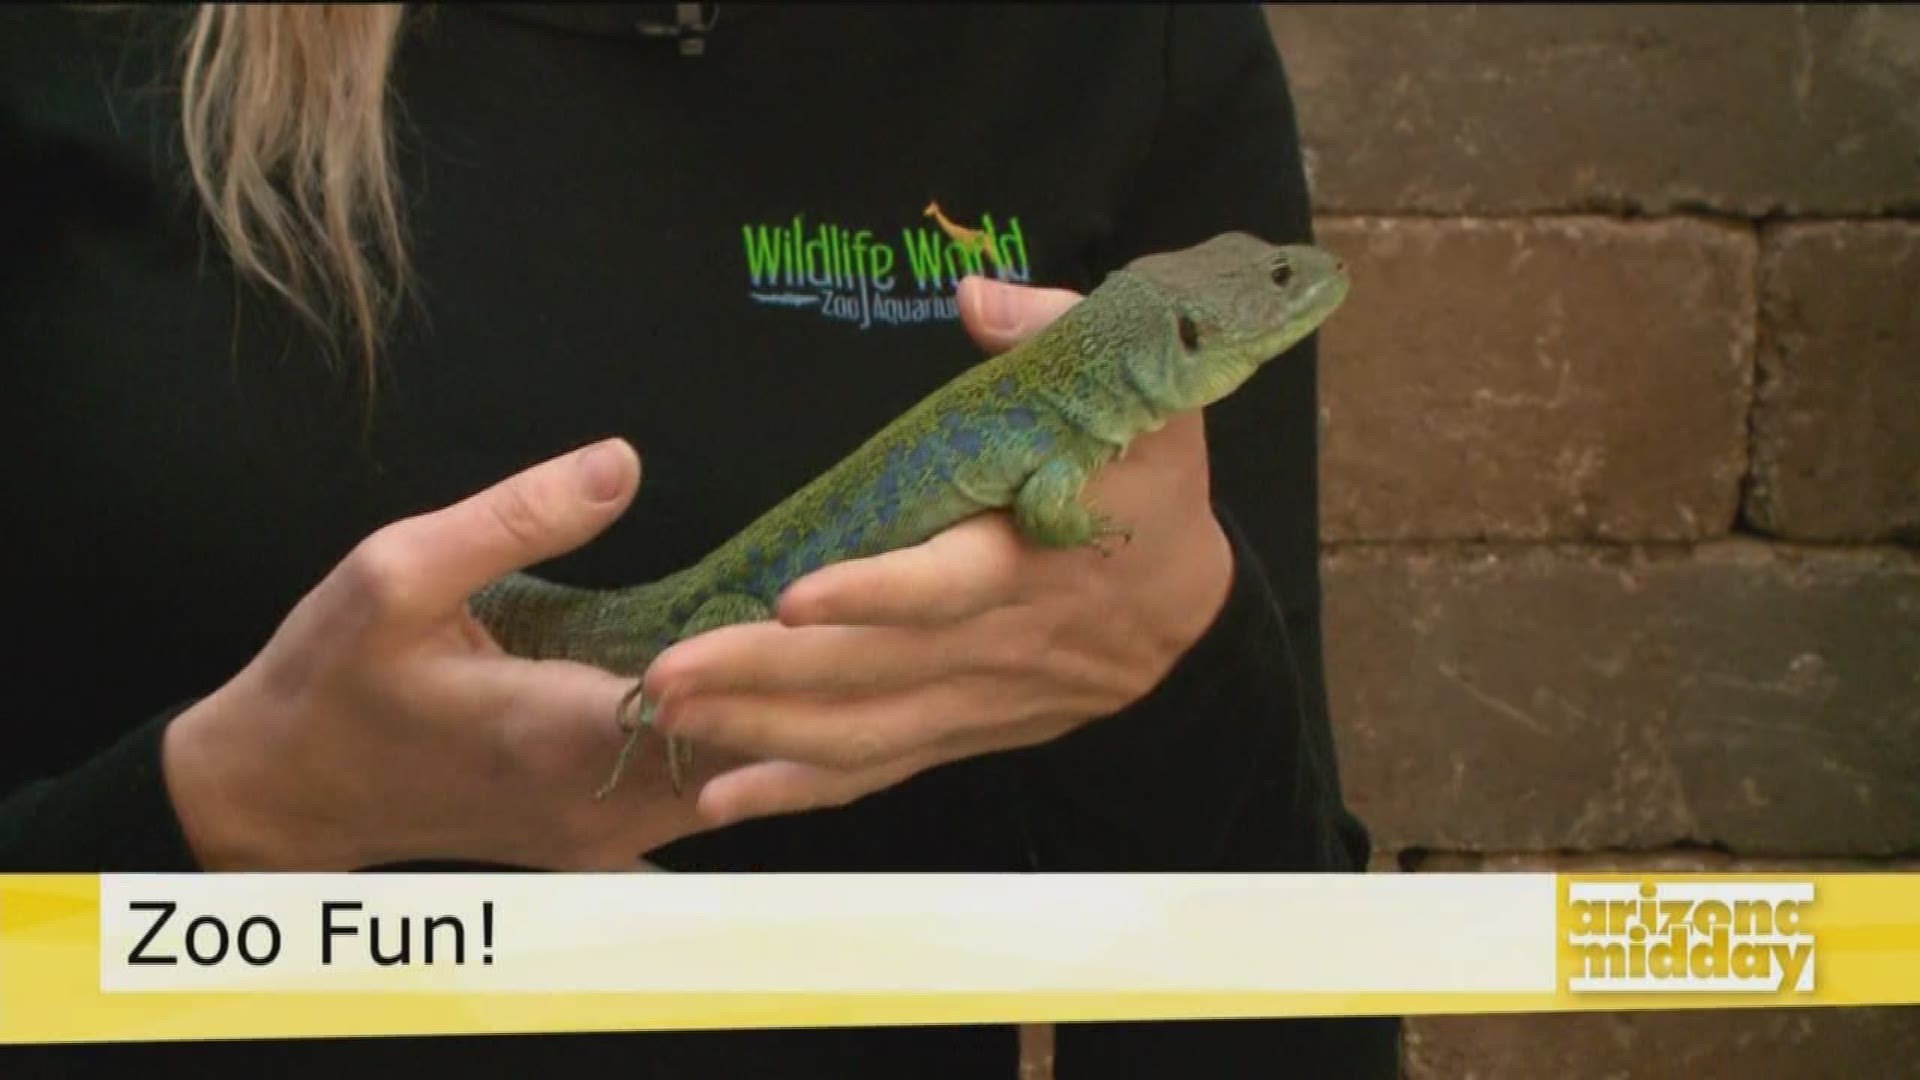 Kristy from Wildlife World Zoo tells us about the zoo, its attractions and lizards!